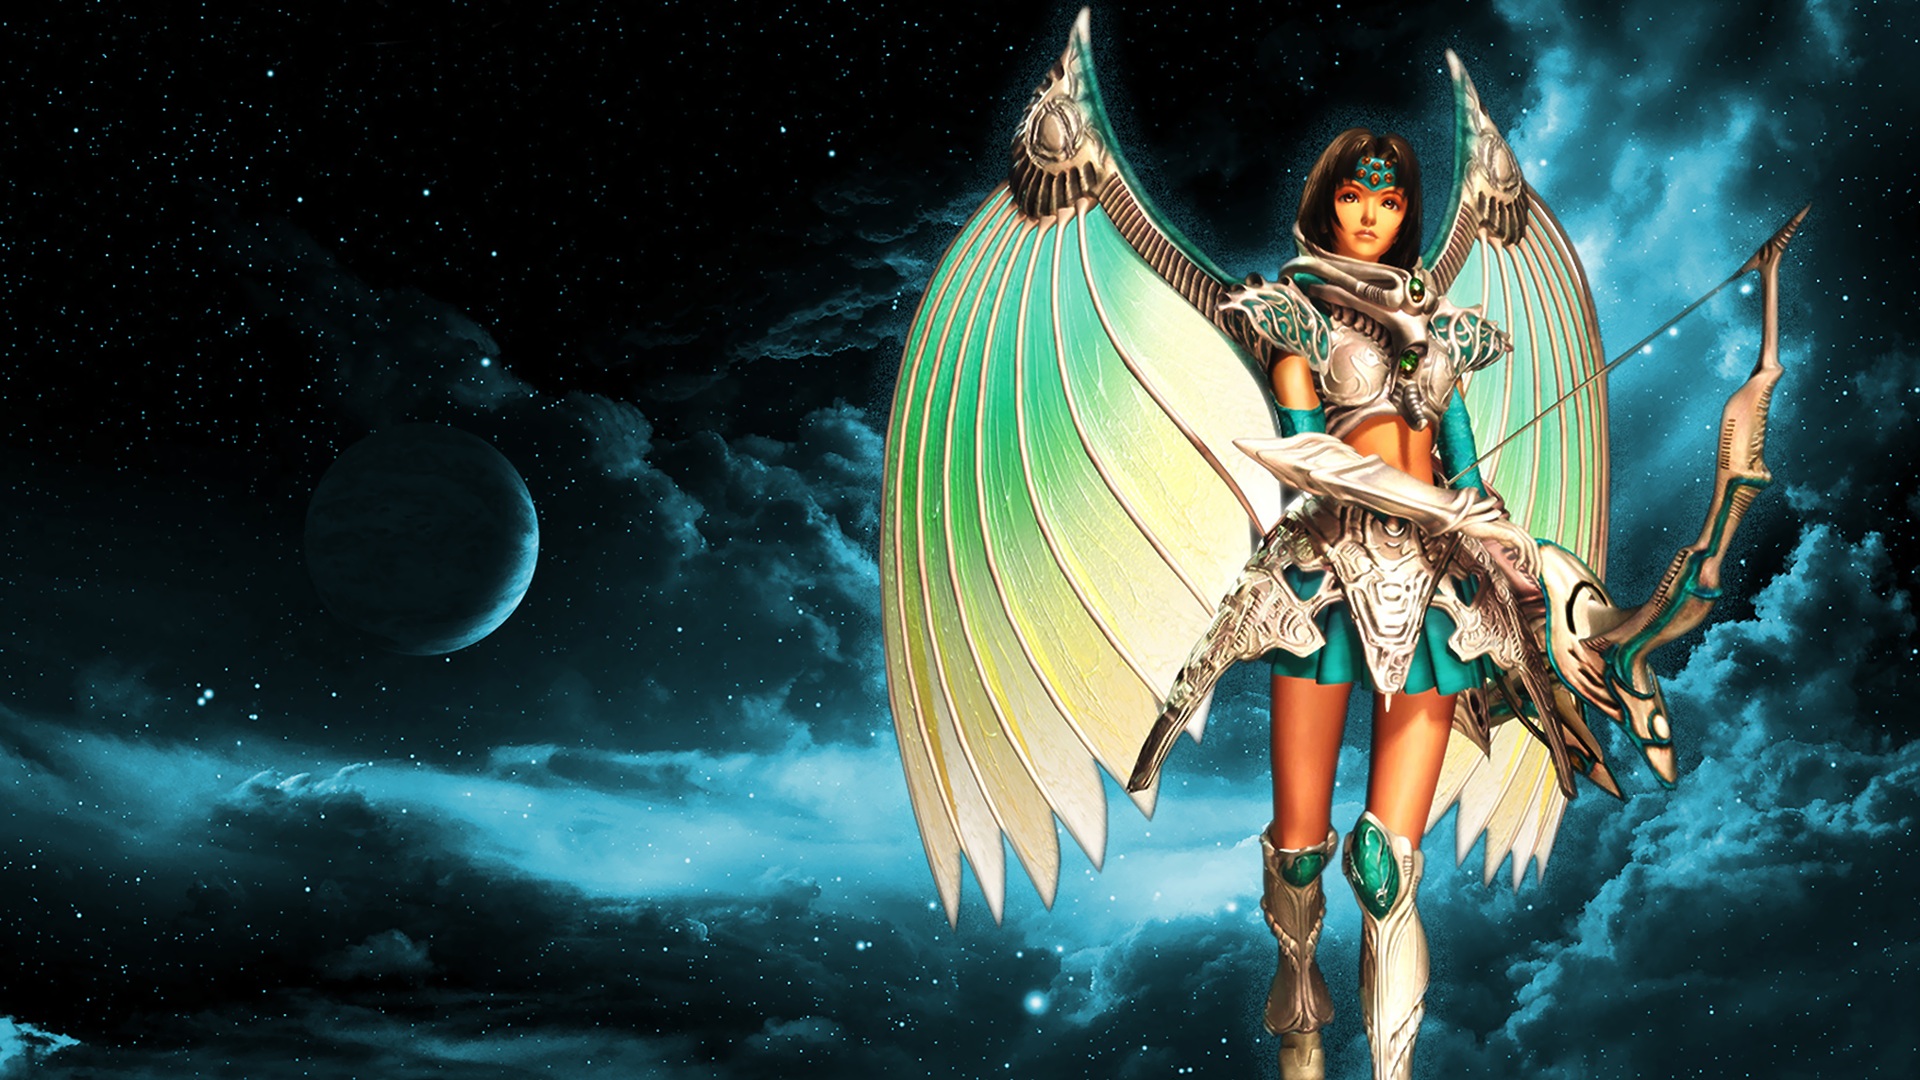 android video game, the legend of dragoon, angel, archer, bow, fantasy, legend of dragoon, warrior